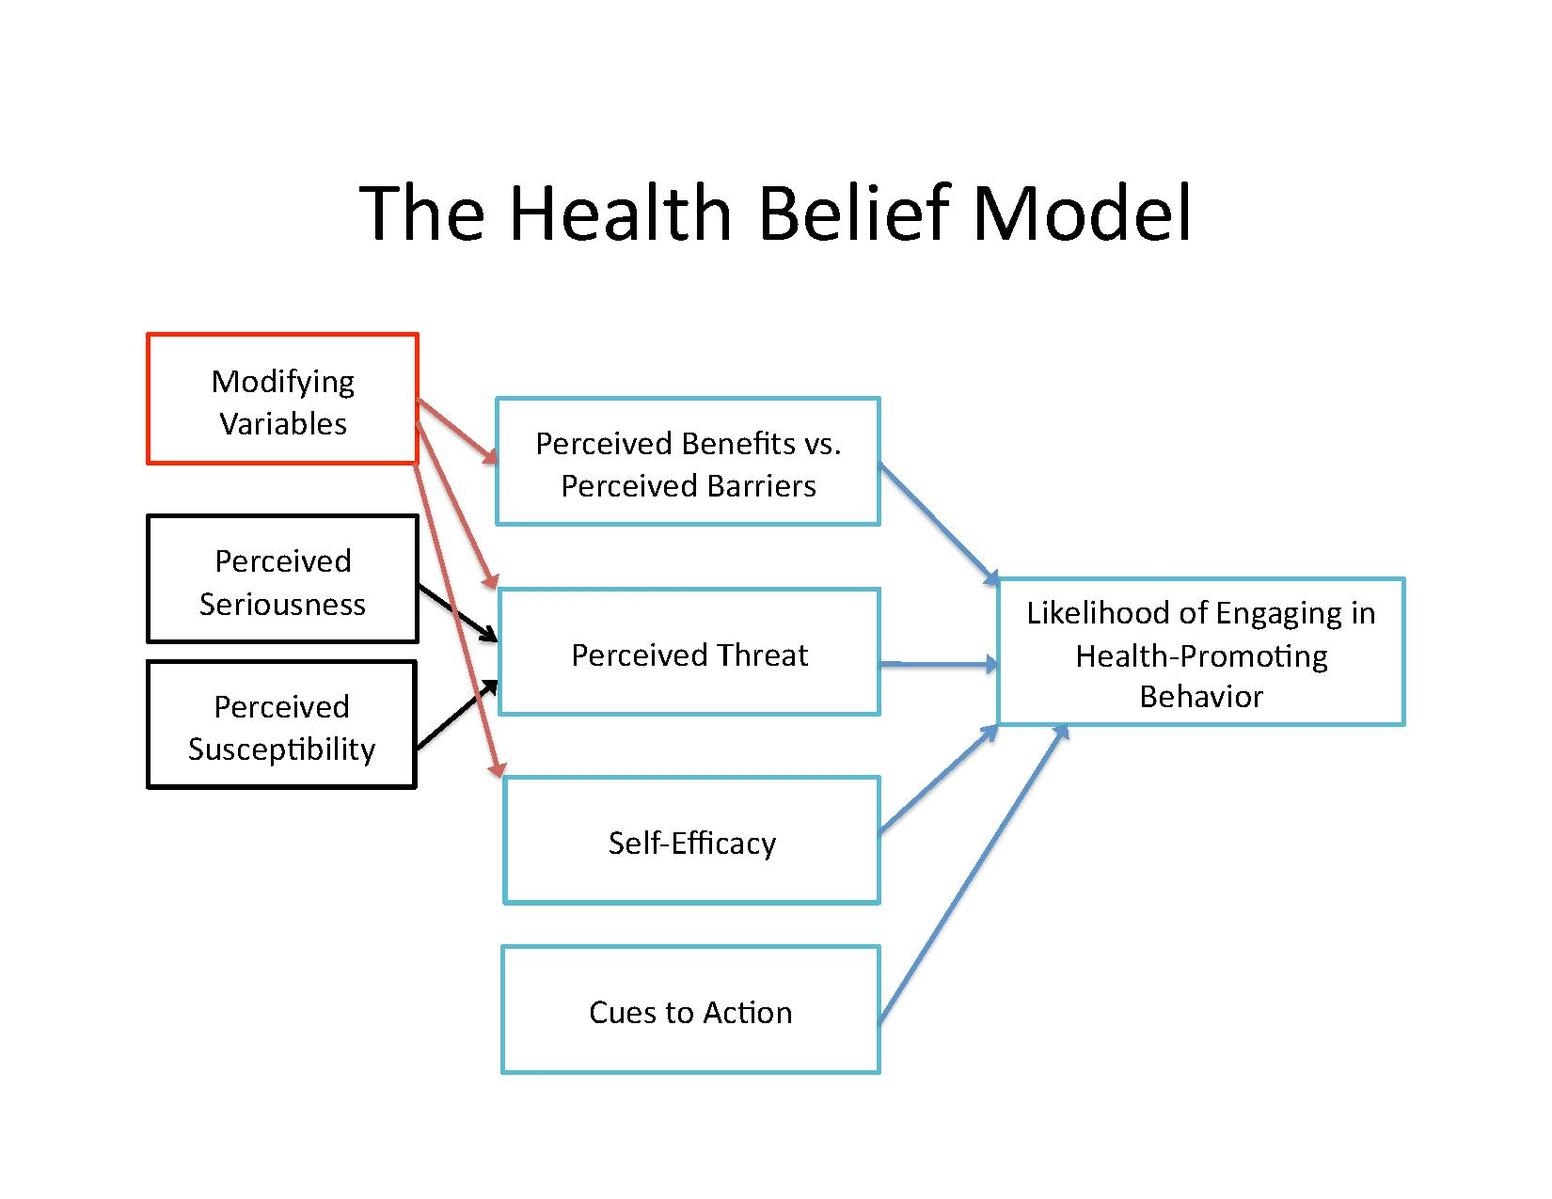 There are boxes with text and links to show the relationshop between the variables, perceived beliefs, and likelihood of engaging health promoting behavior.